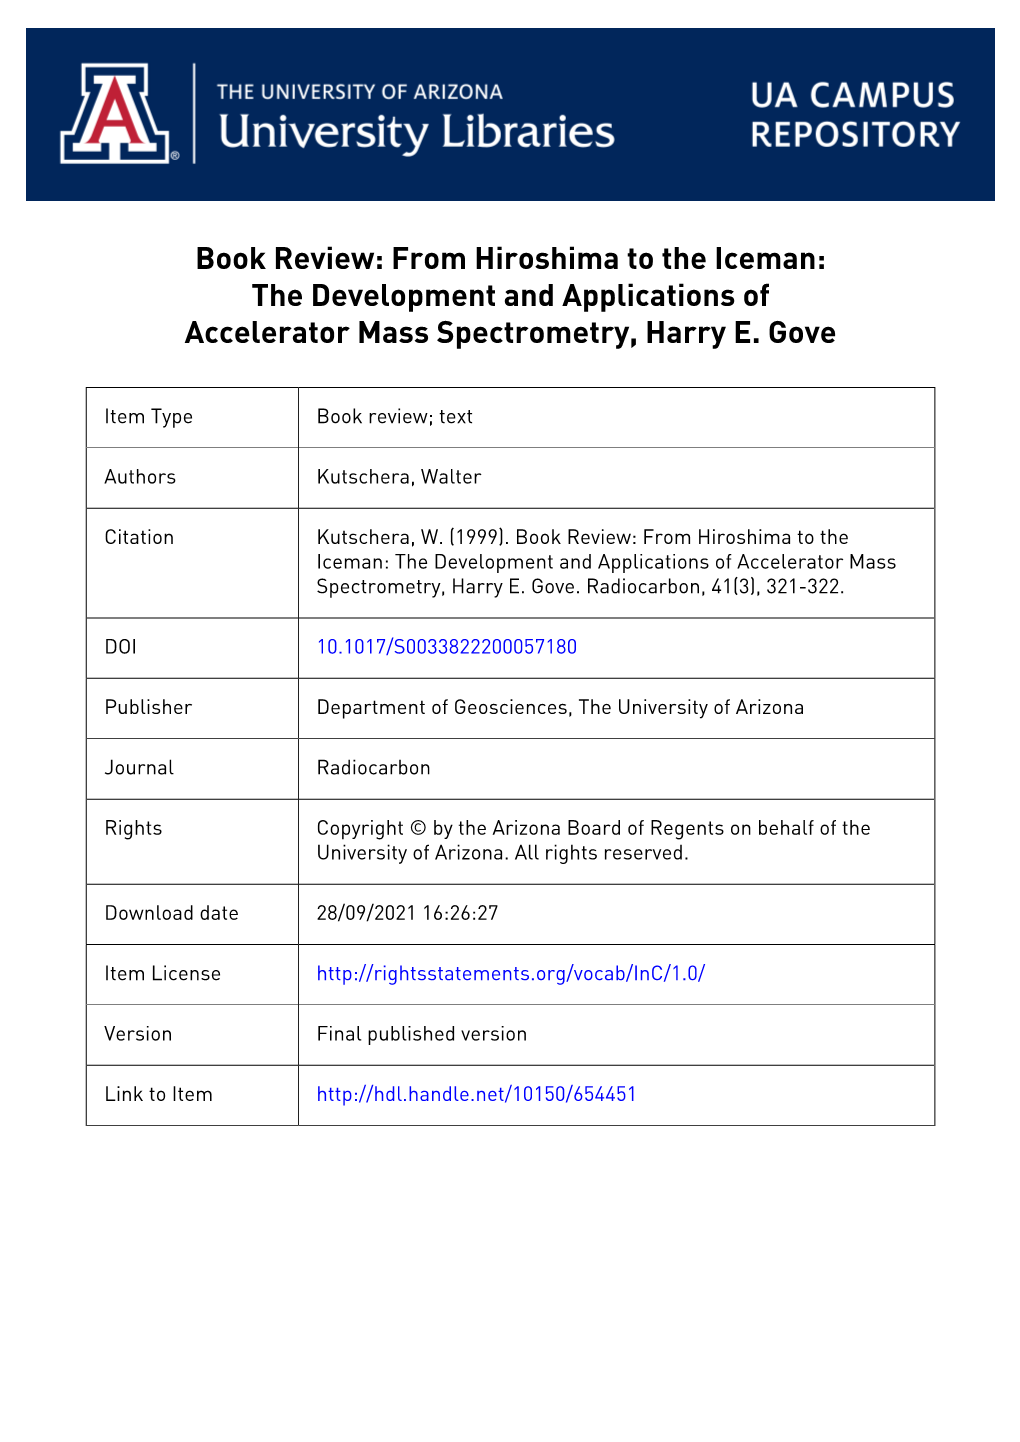 Book Review: from Hiroshima to the Iceman: the Development and Applications of Accelerator Mass Spectrometry, Harry E